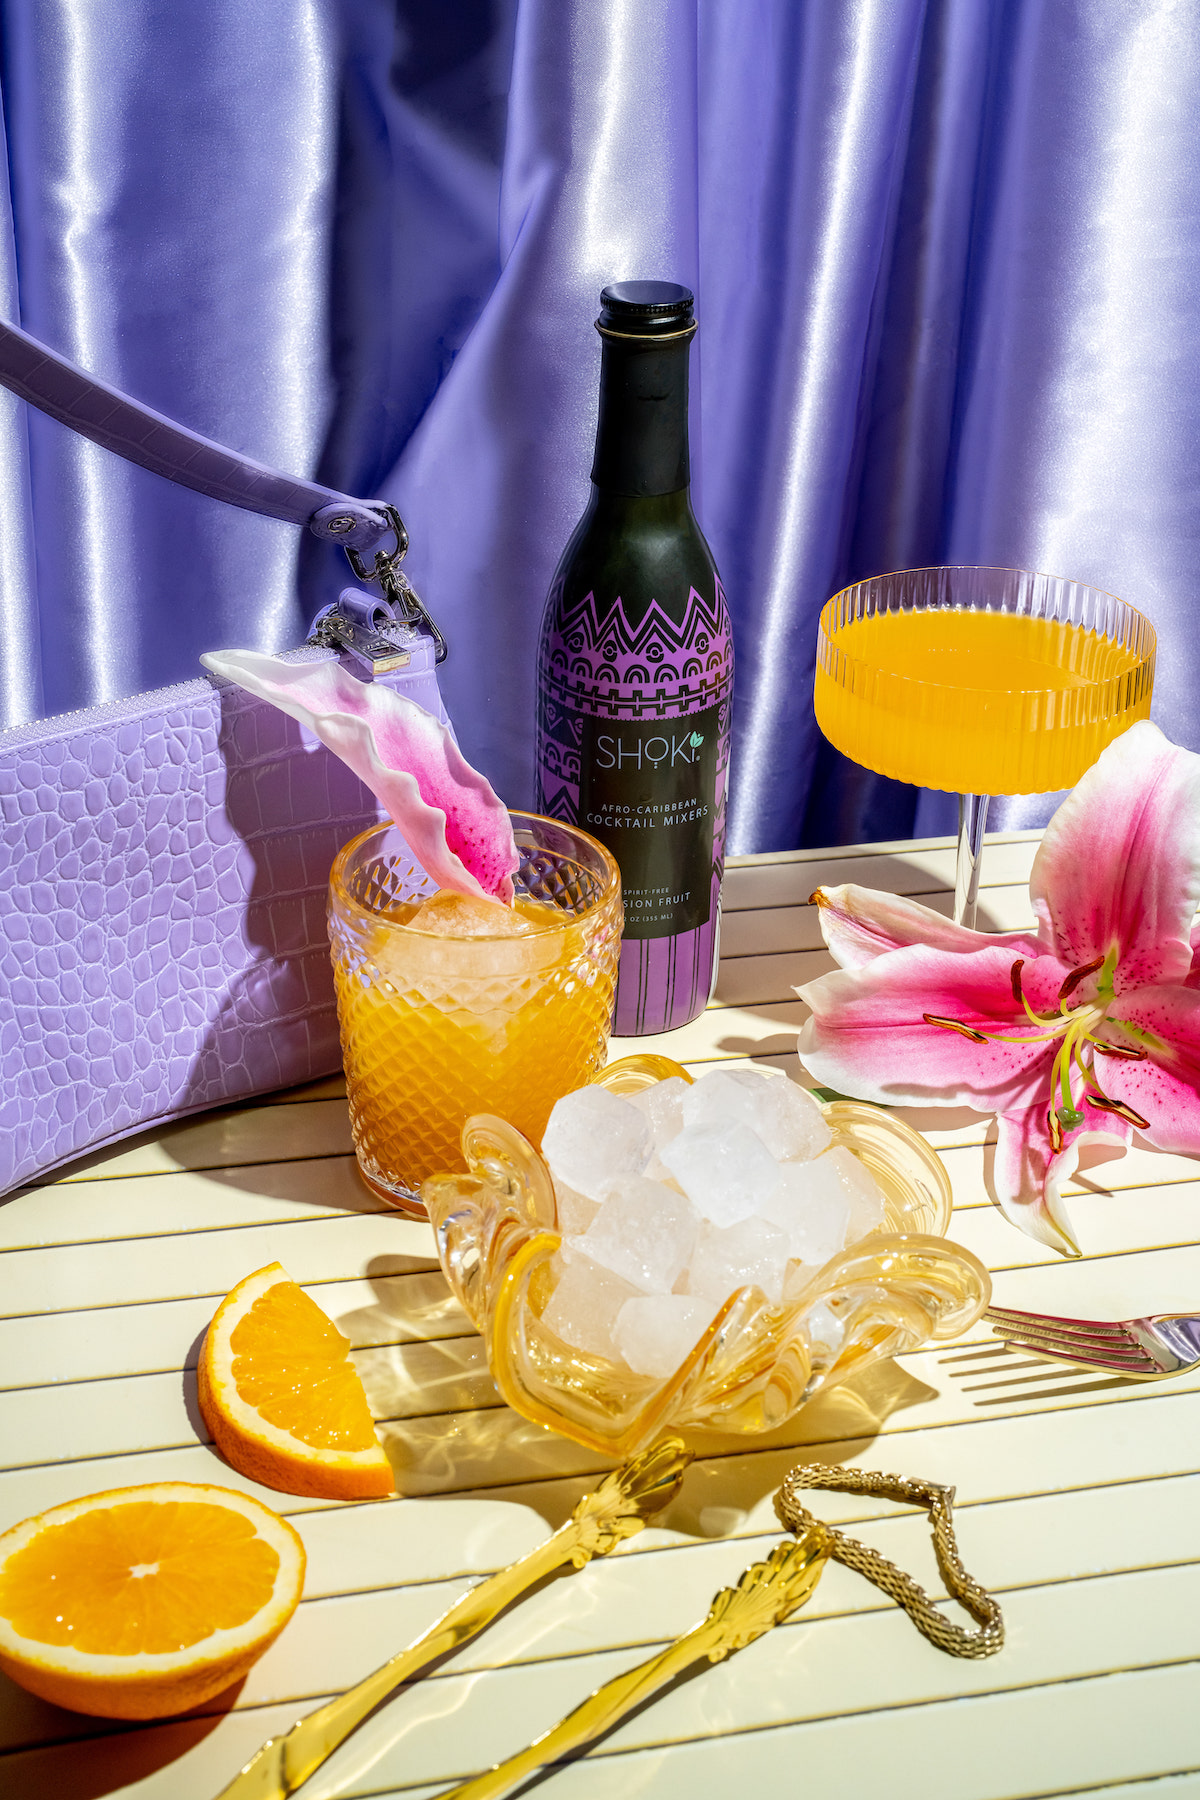 Shoki display of orange beverages in cocktail glasses adorned by pink lilies against a lavender satin curtain